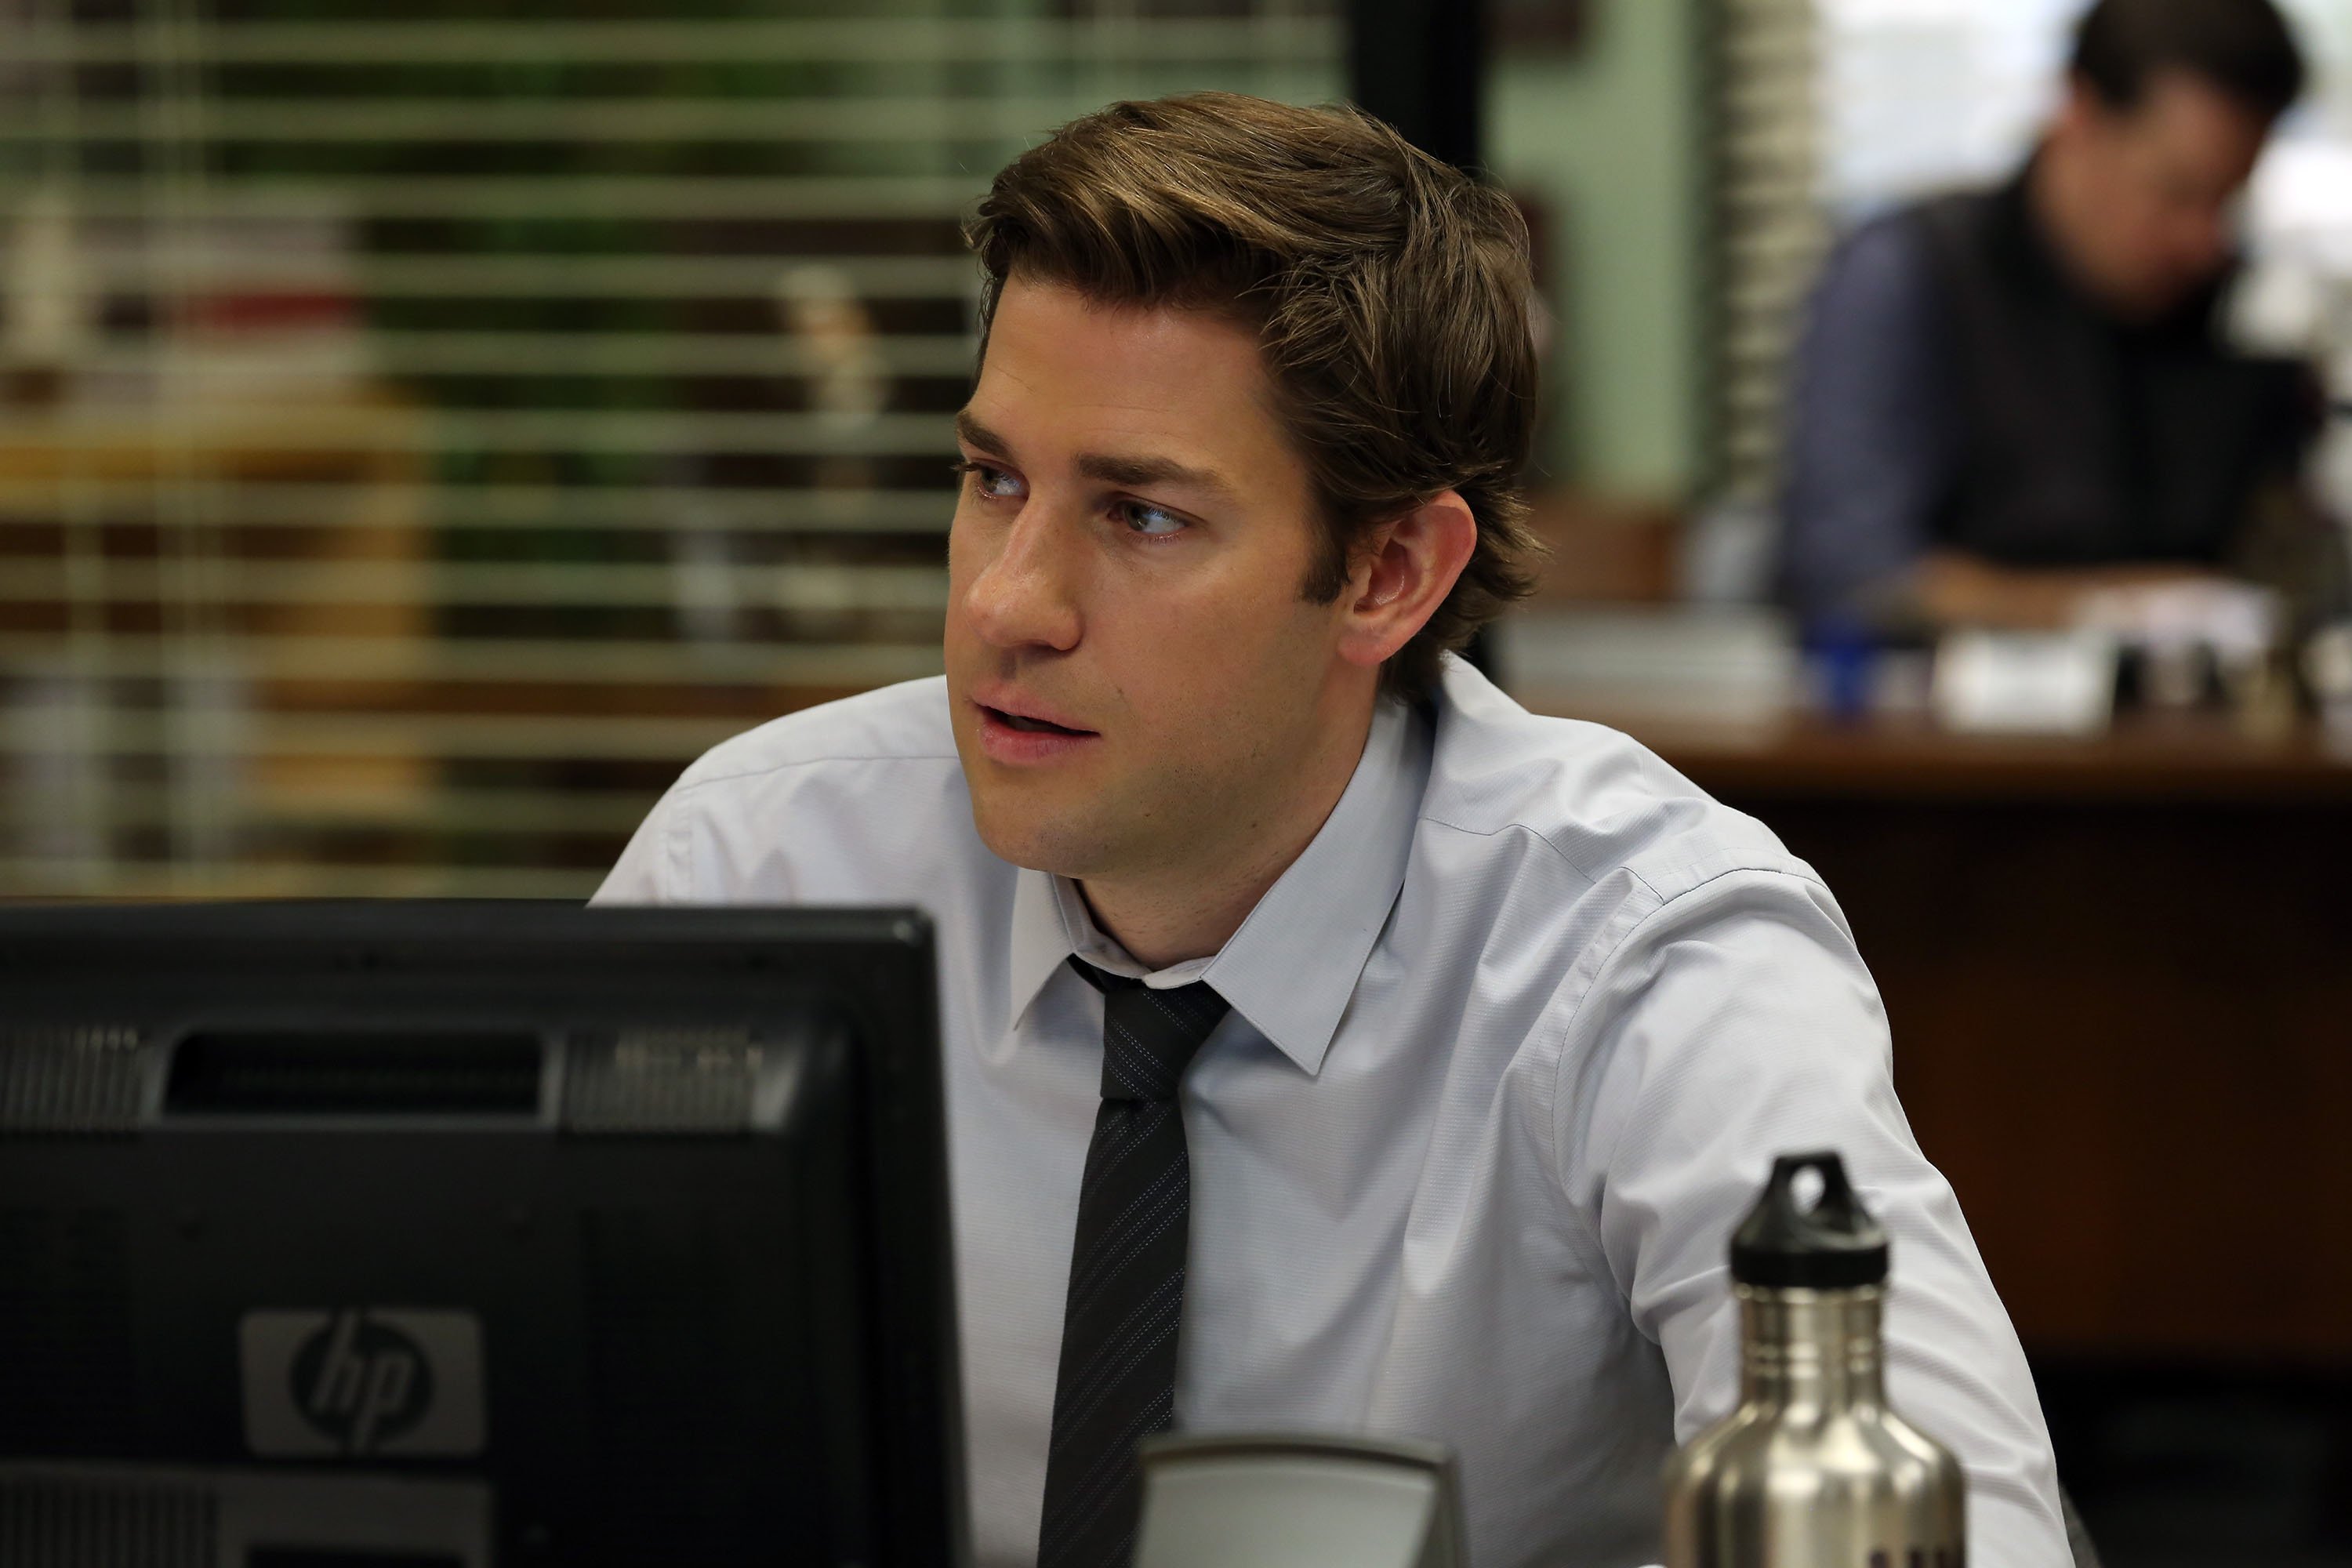 The Office': John Krasinski Is the Reason the Show Ended When It Did